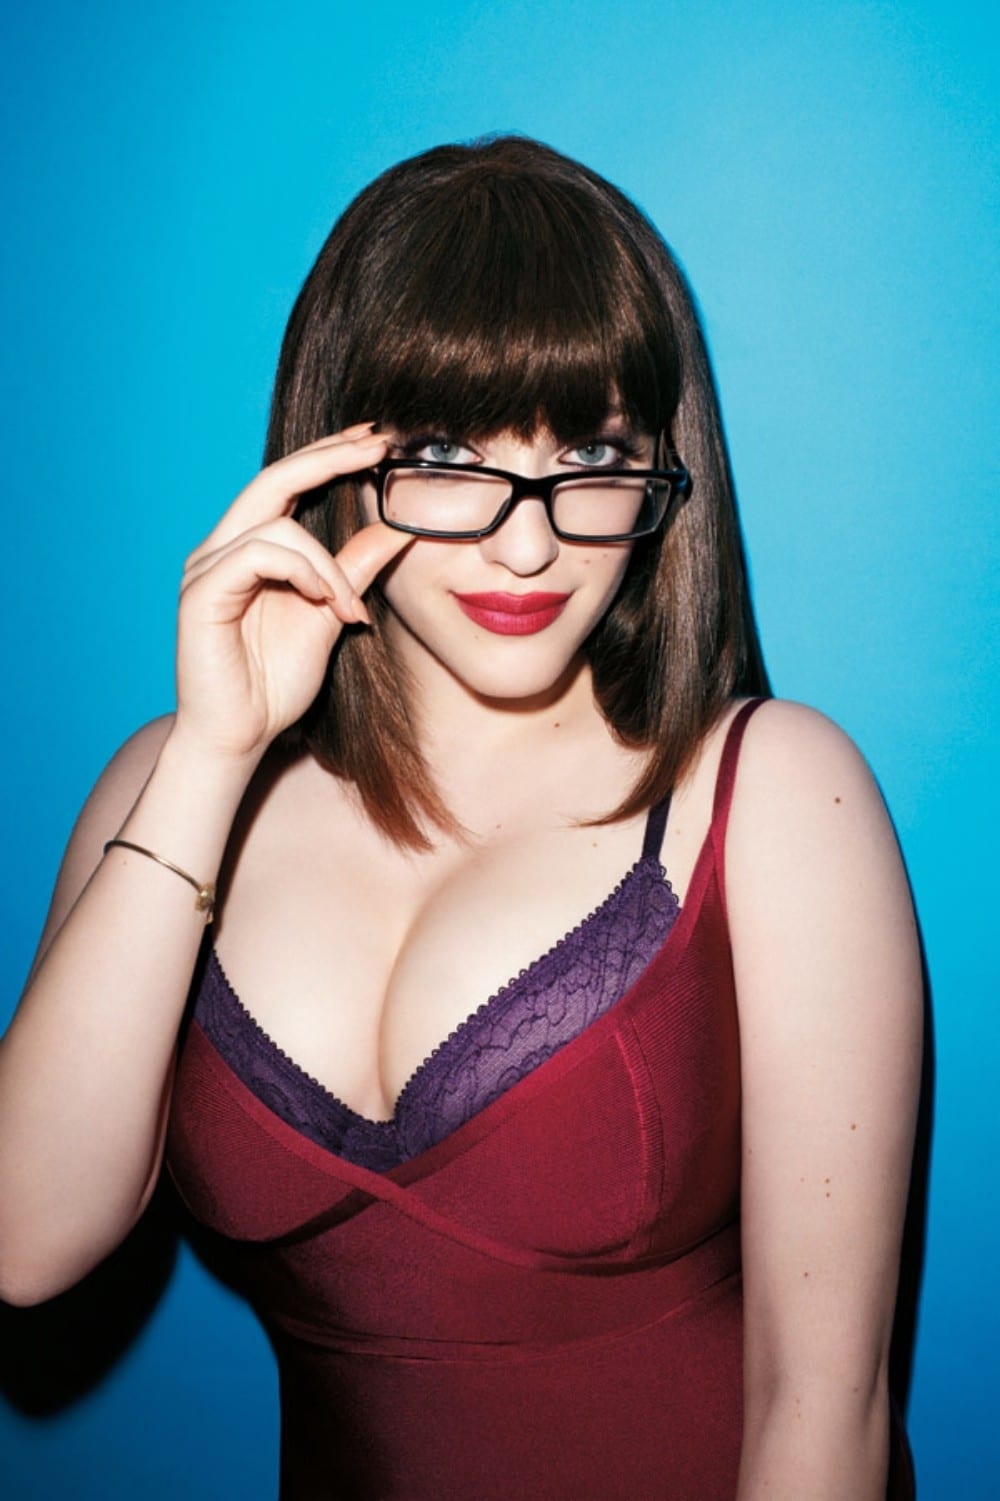 Kat dennings leaked pictures